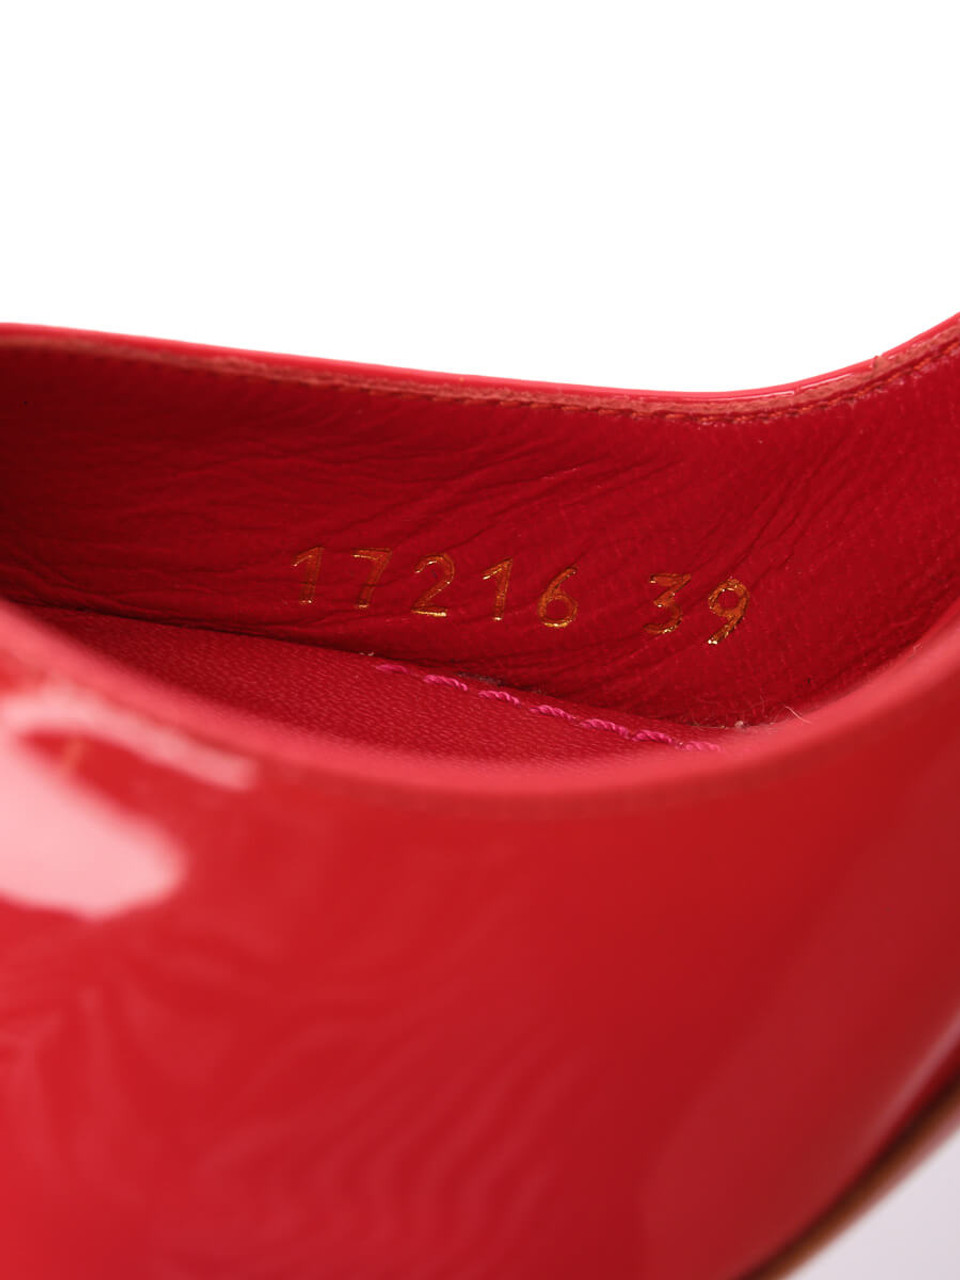 Women Dolce & Gabbana Pointed - Toe Pump Heels -  Red Size 39 US 9